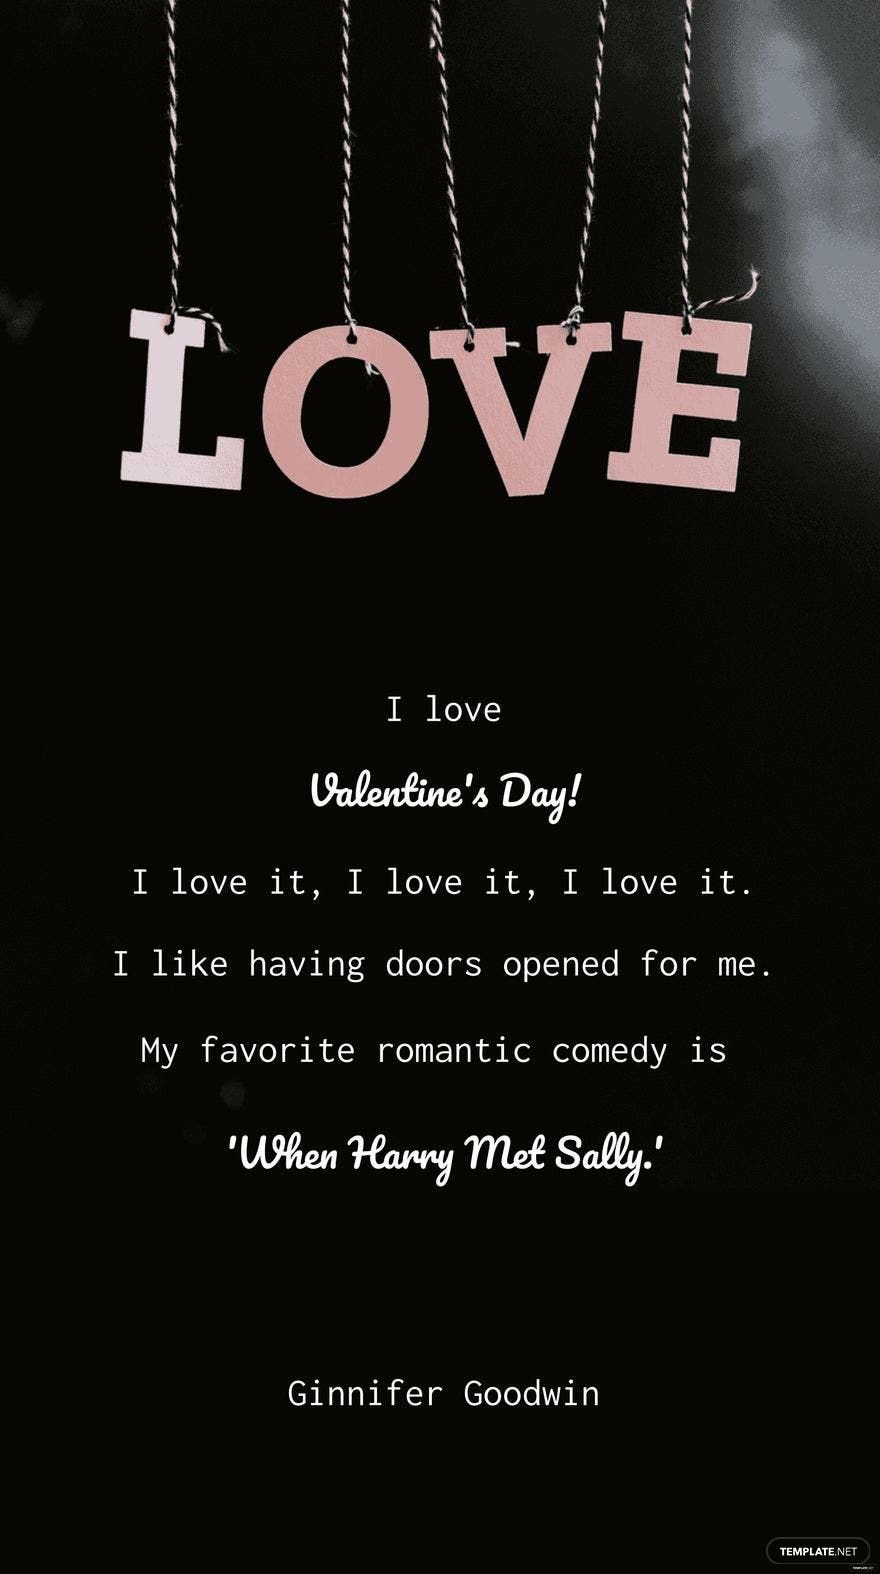 Ginnifer Goodwin - I love Valentine's Day! I love it, I love it, I love it. I like having doors opened for me. My favorite romantic comedy is 'When Harry Met Sally.' in JPEG